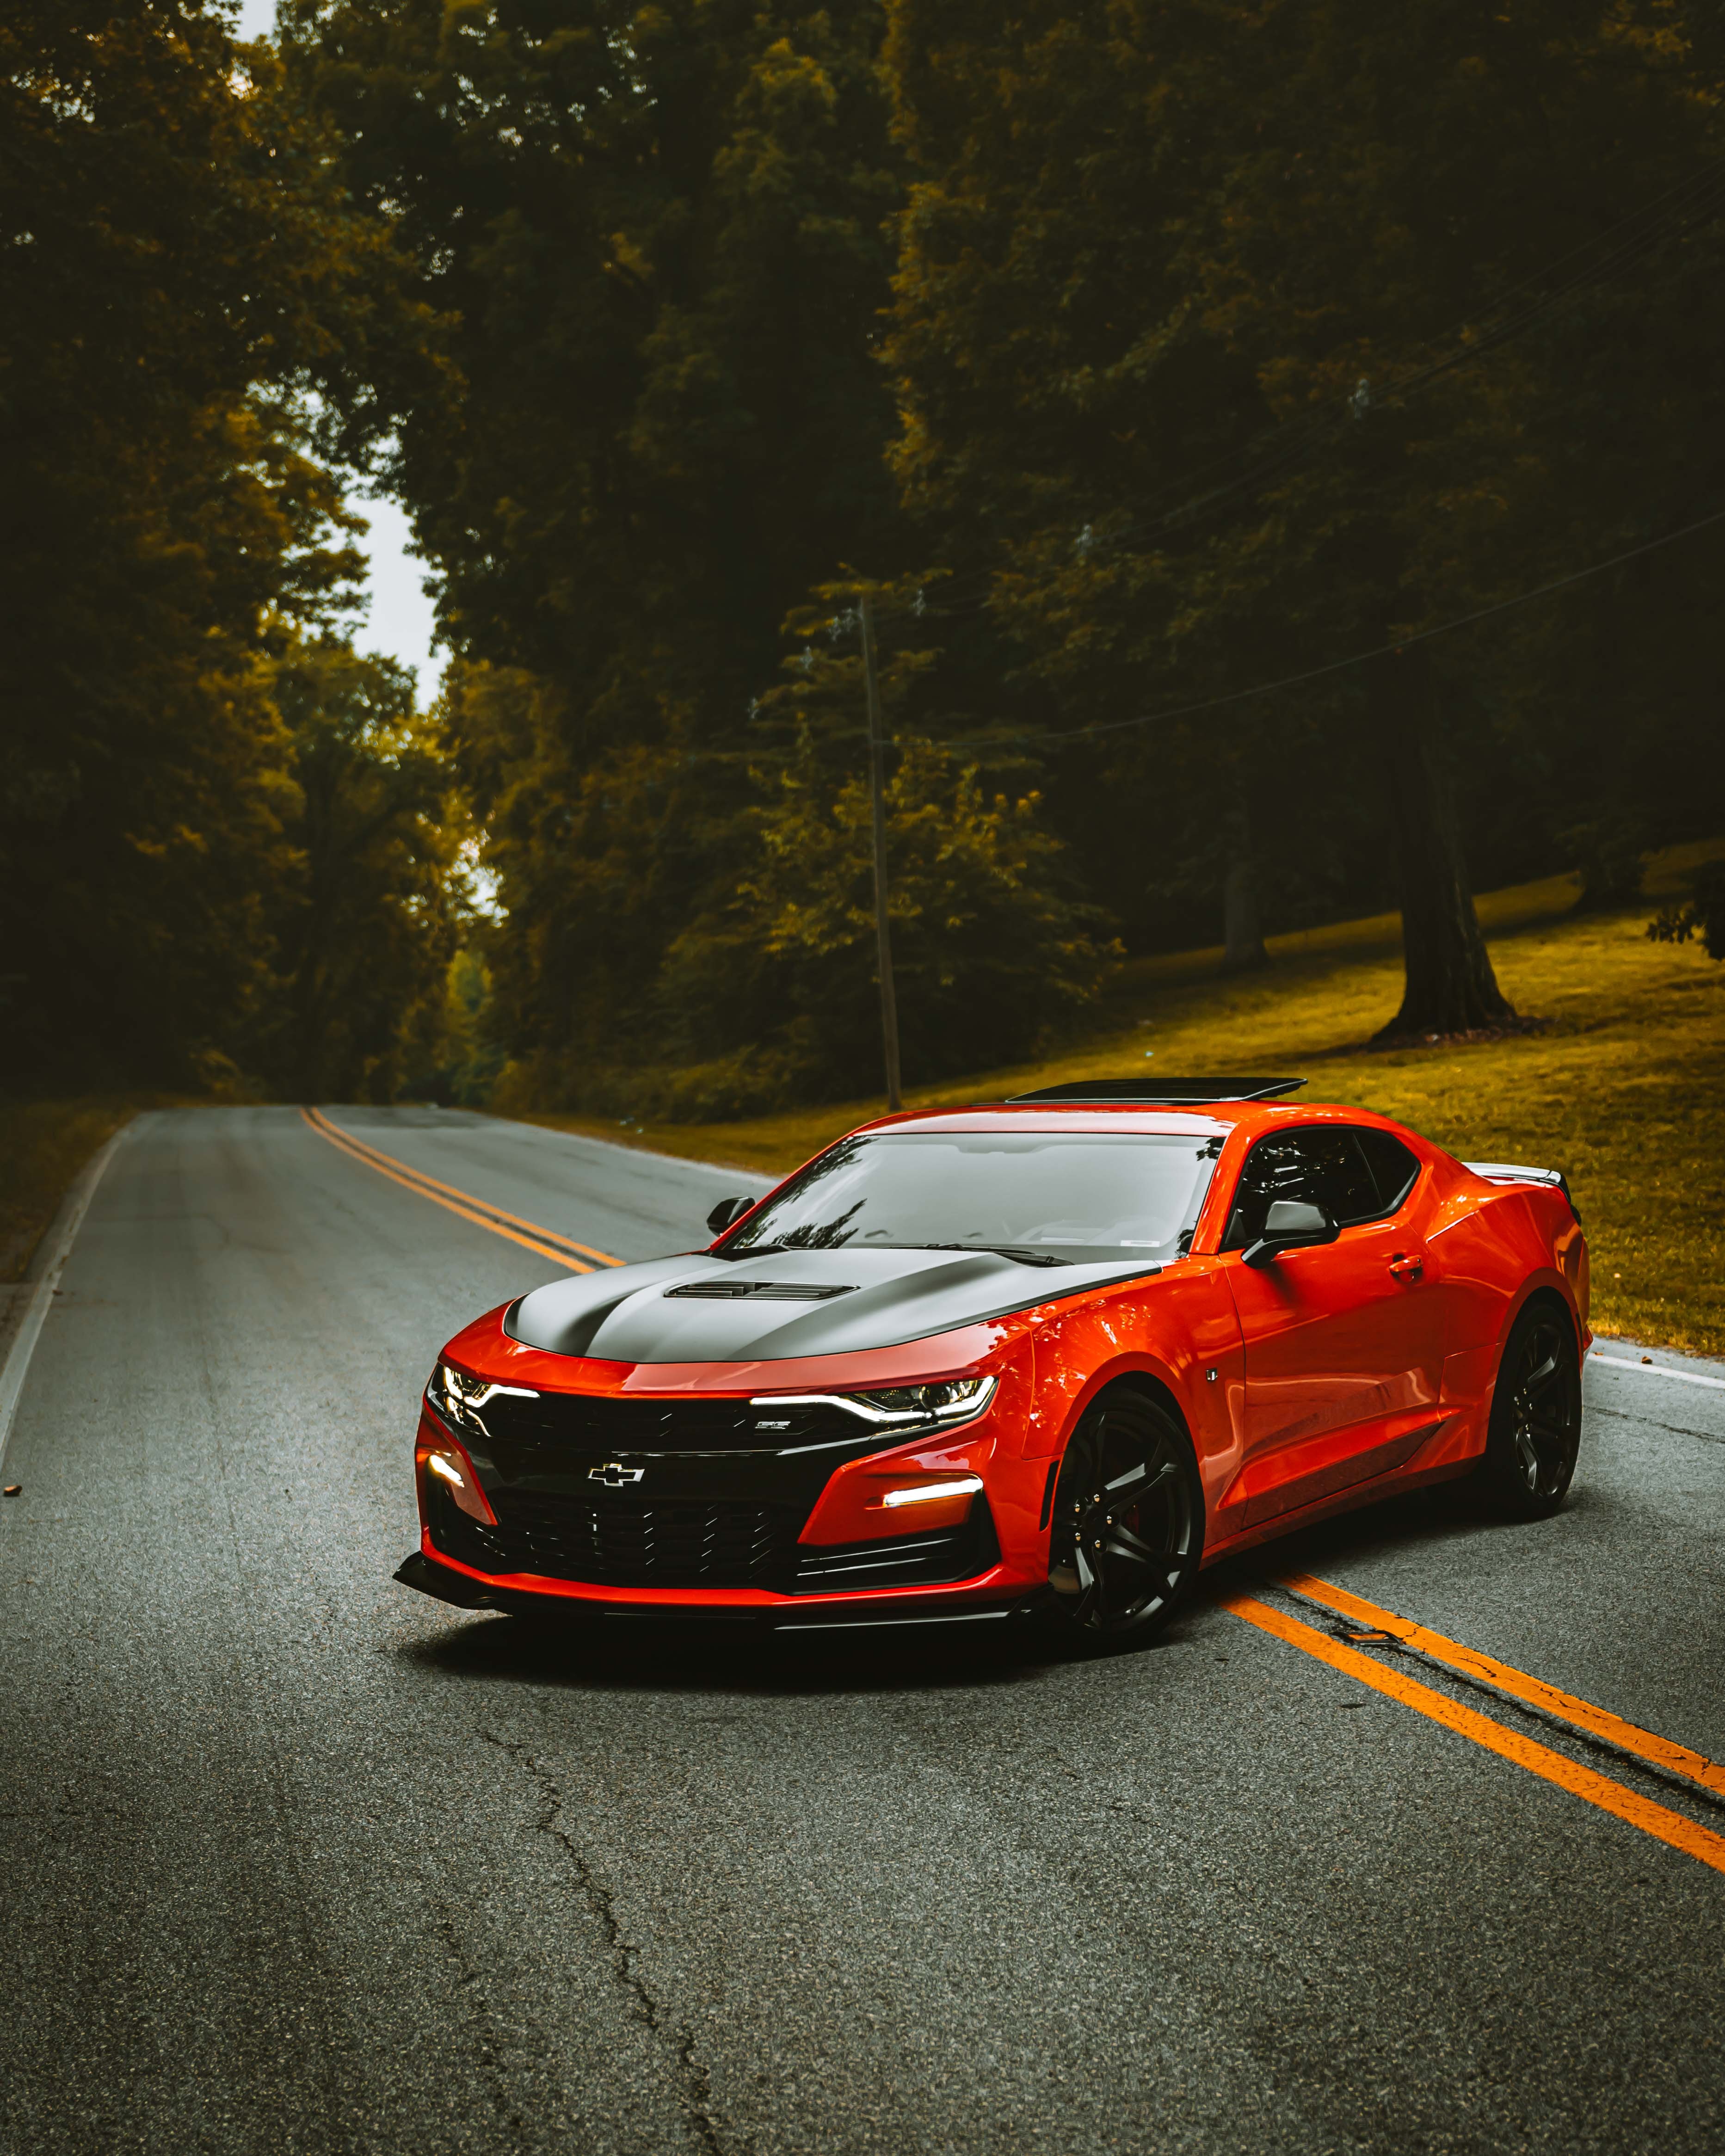 android chevrolet, machine, chevrolet camaro, car, cars, sports car, sports, red, road